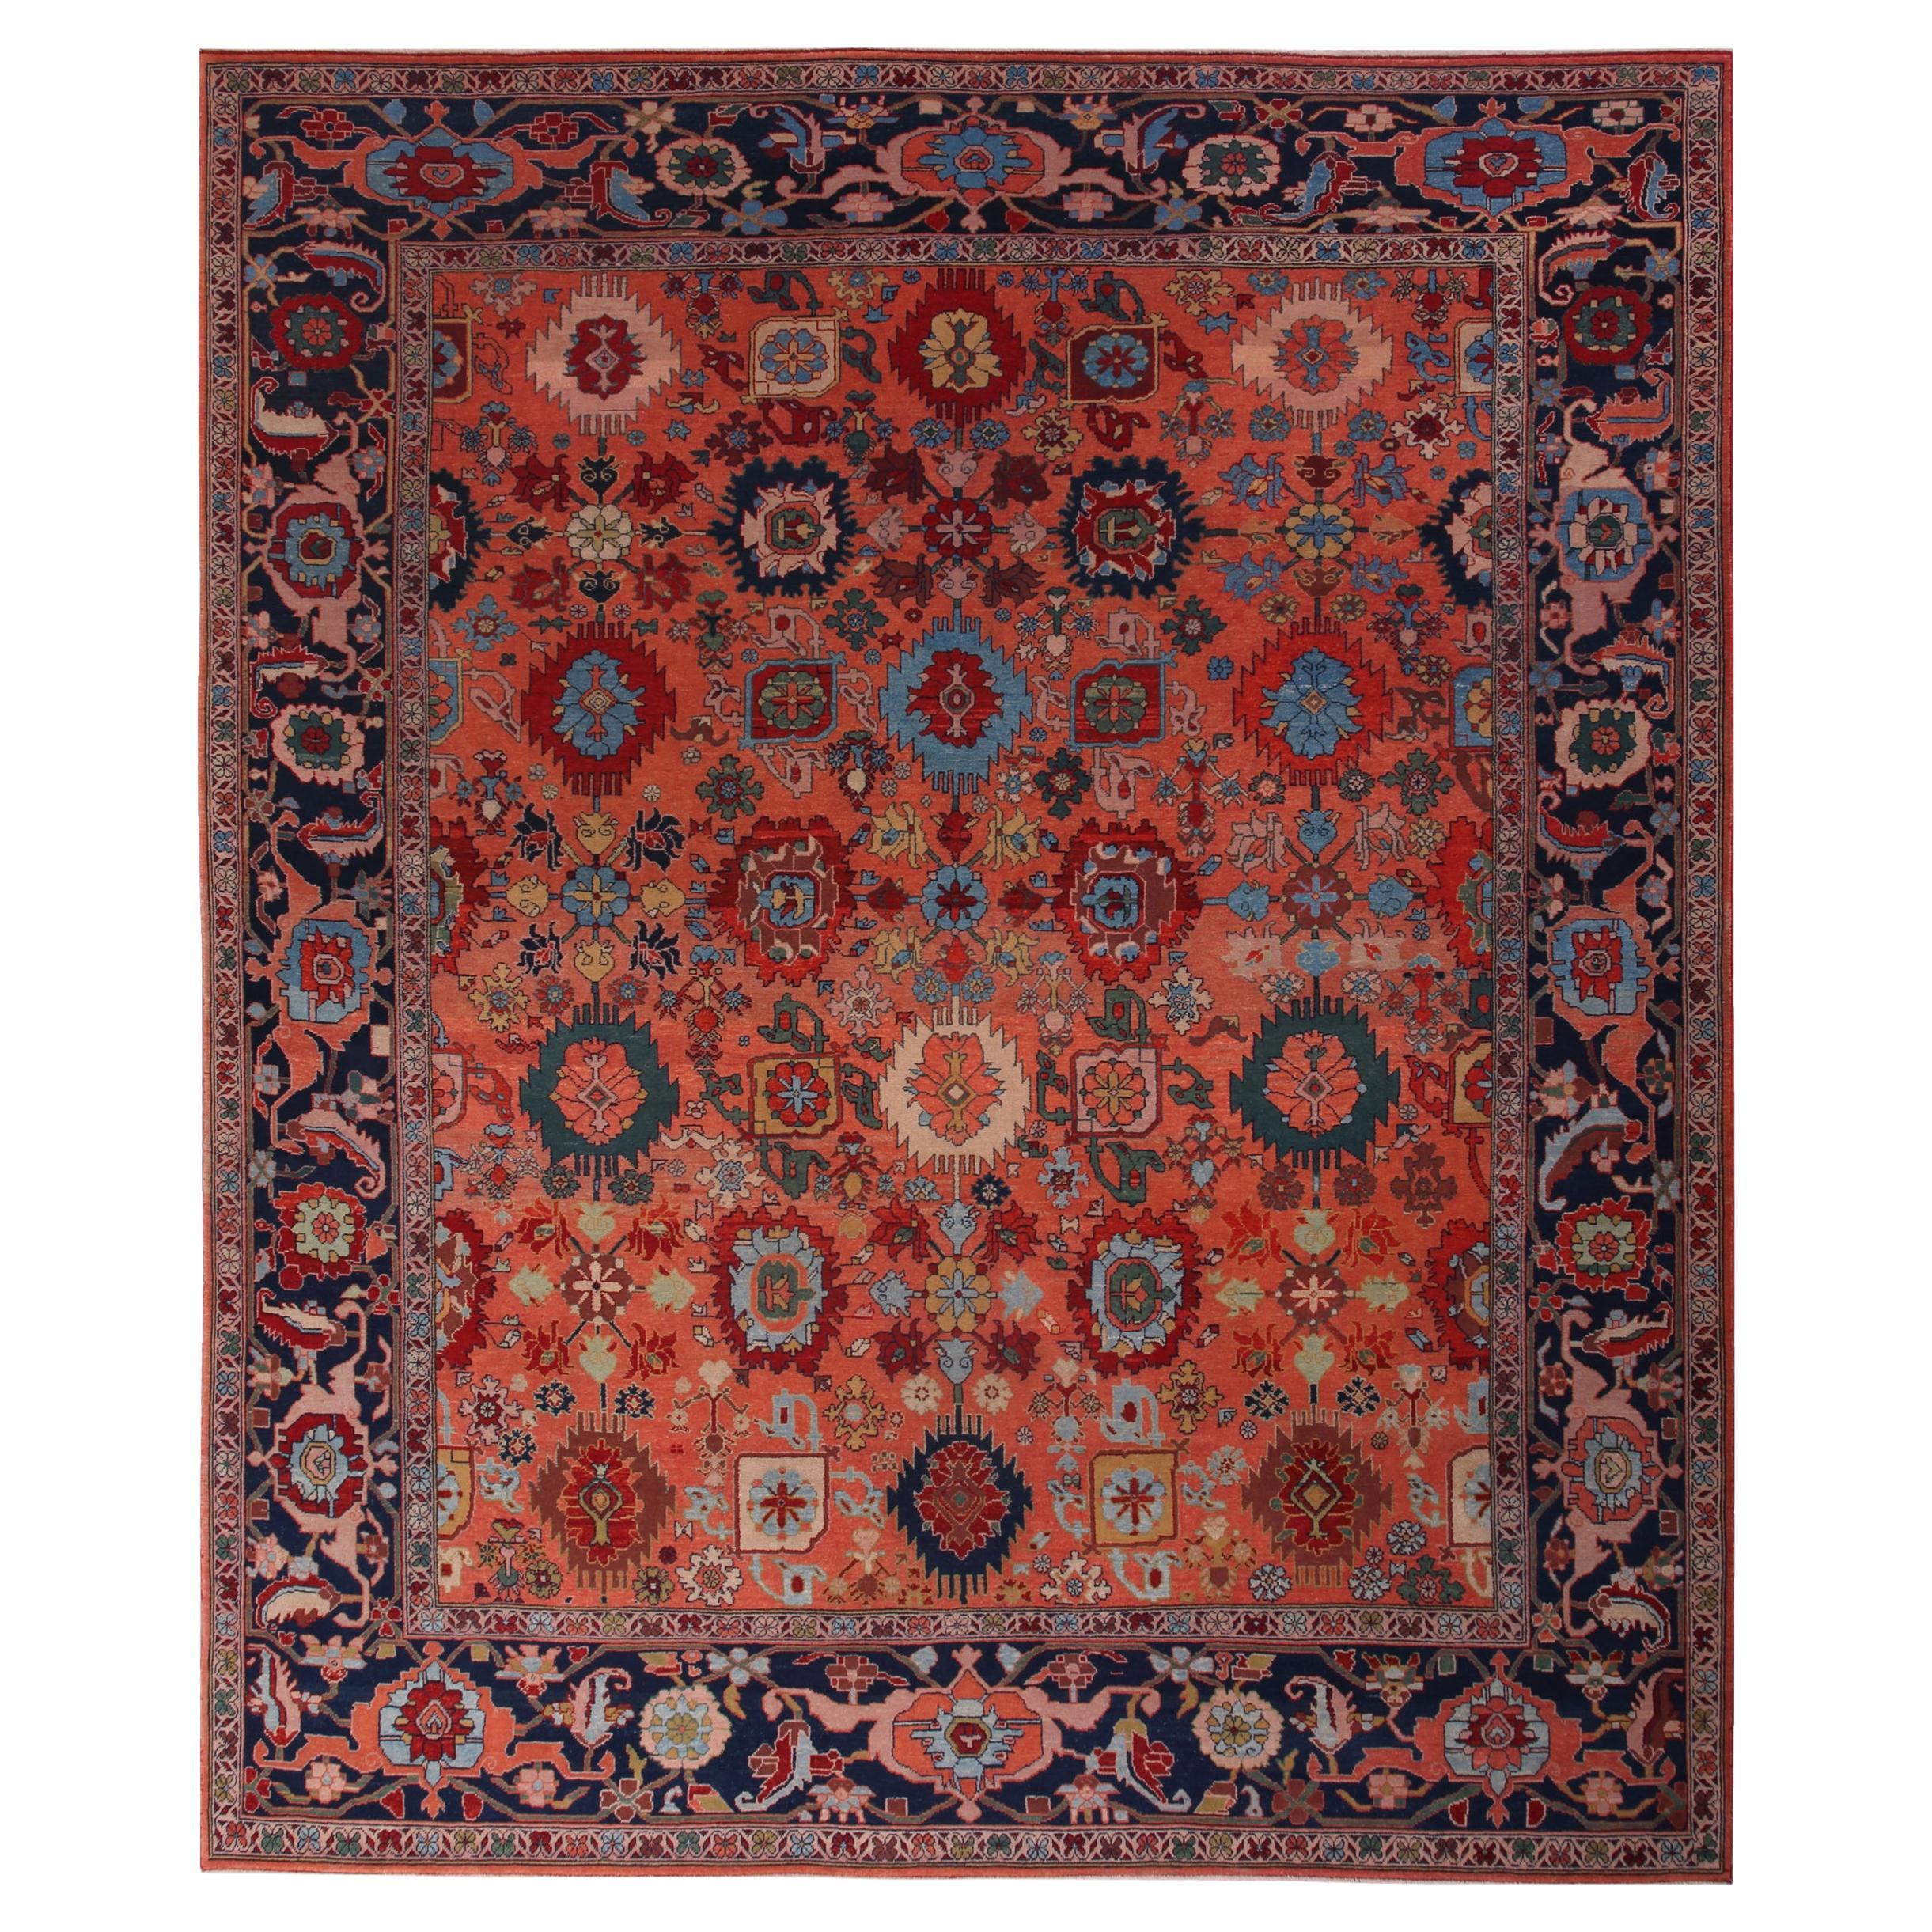 Ararat Rugs Palmettes and Flowers Lattice Rug, Revival Carpet, Natural Dyed For Sale